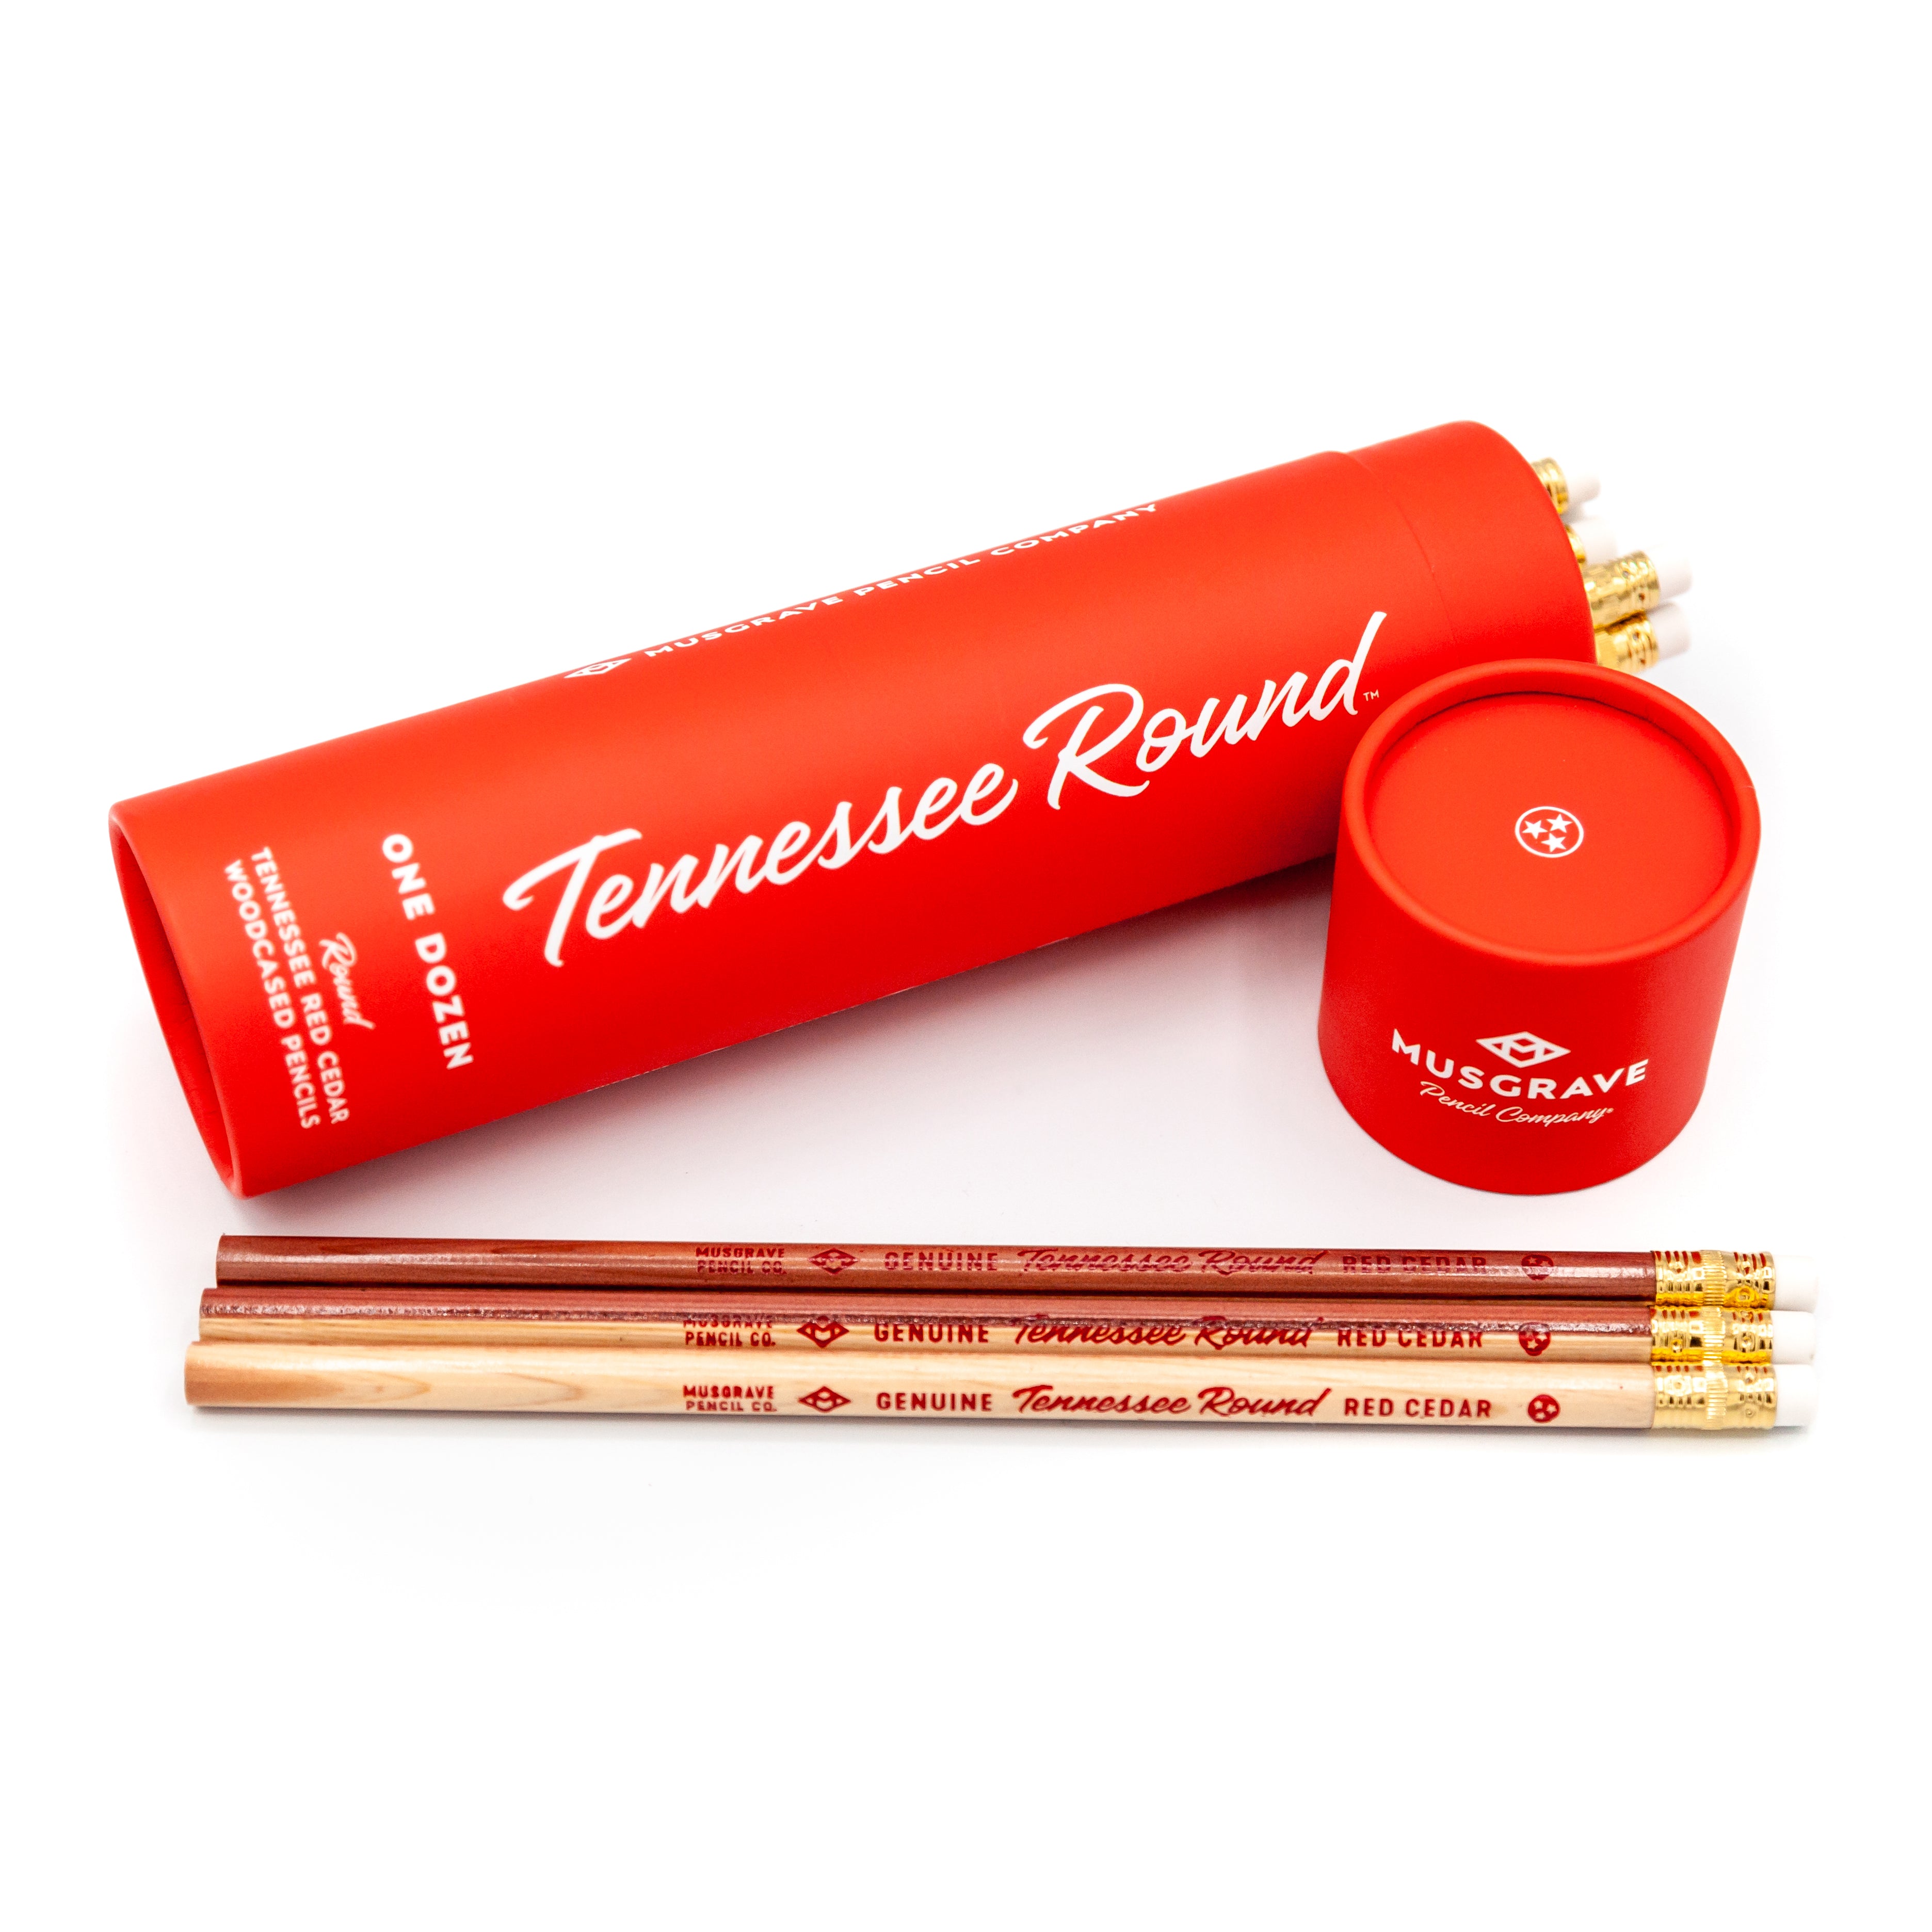 12-pack Tennessee Round™